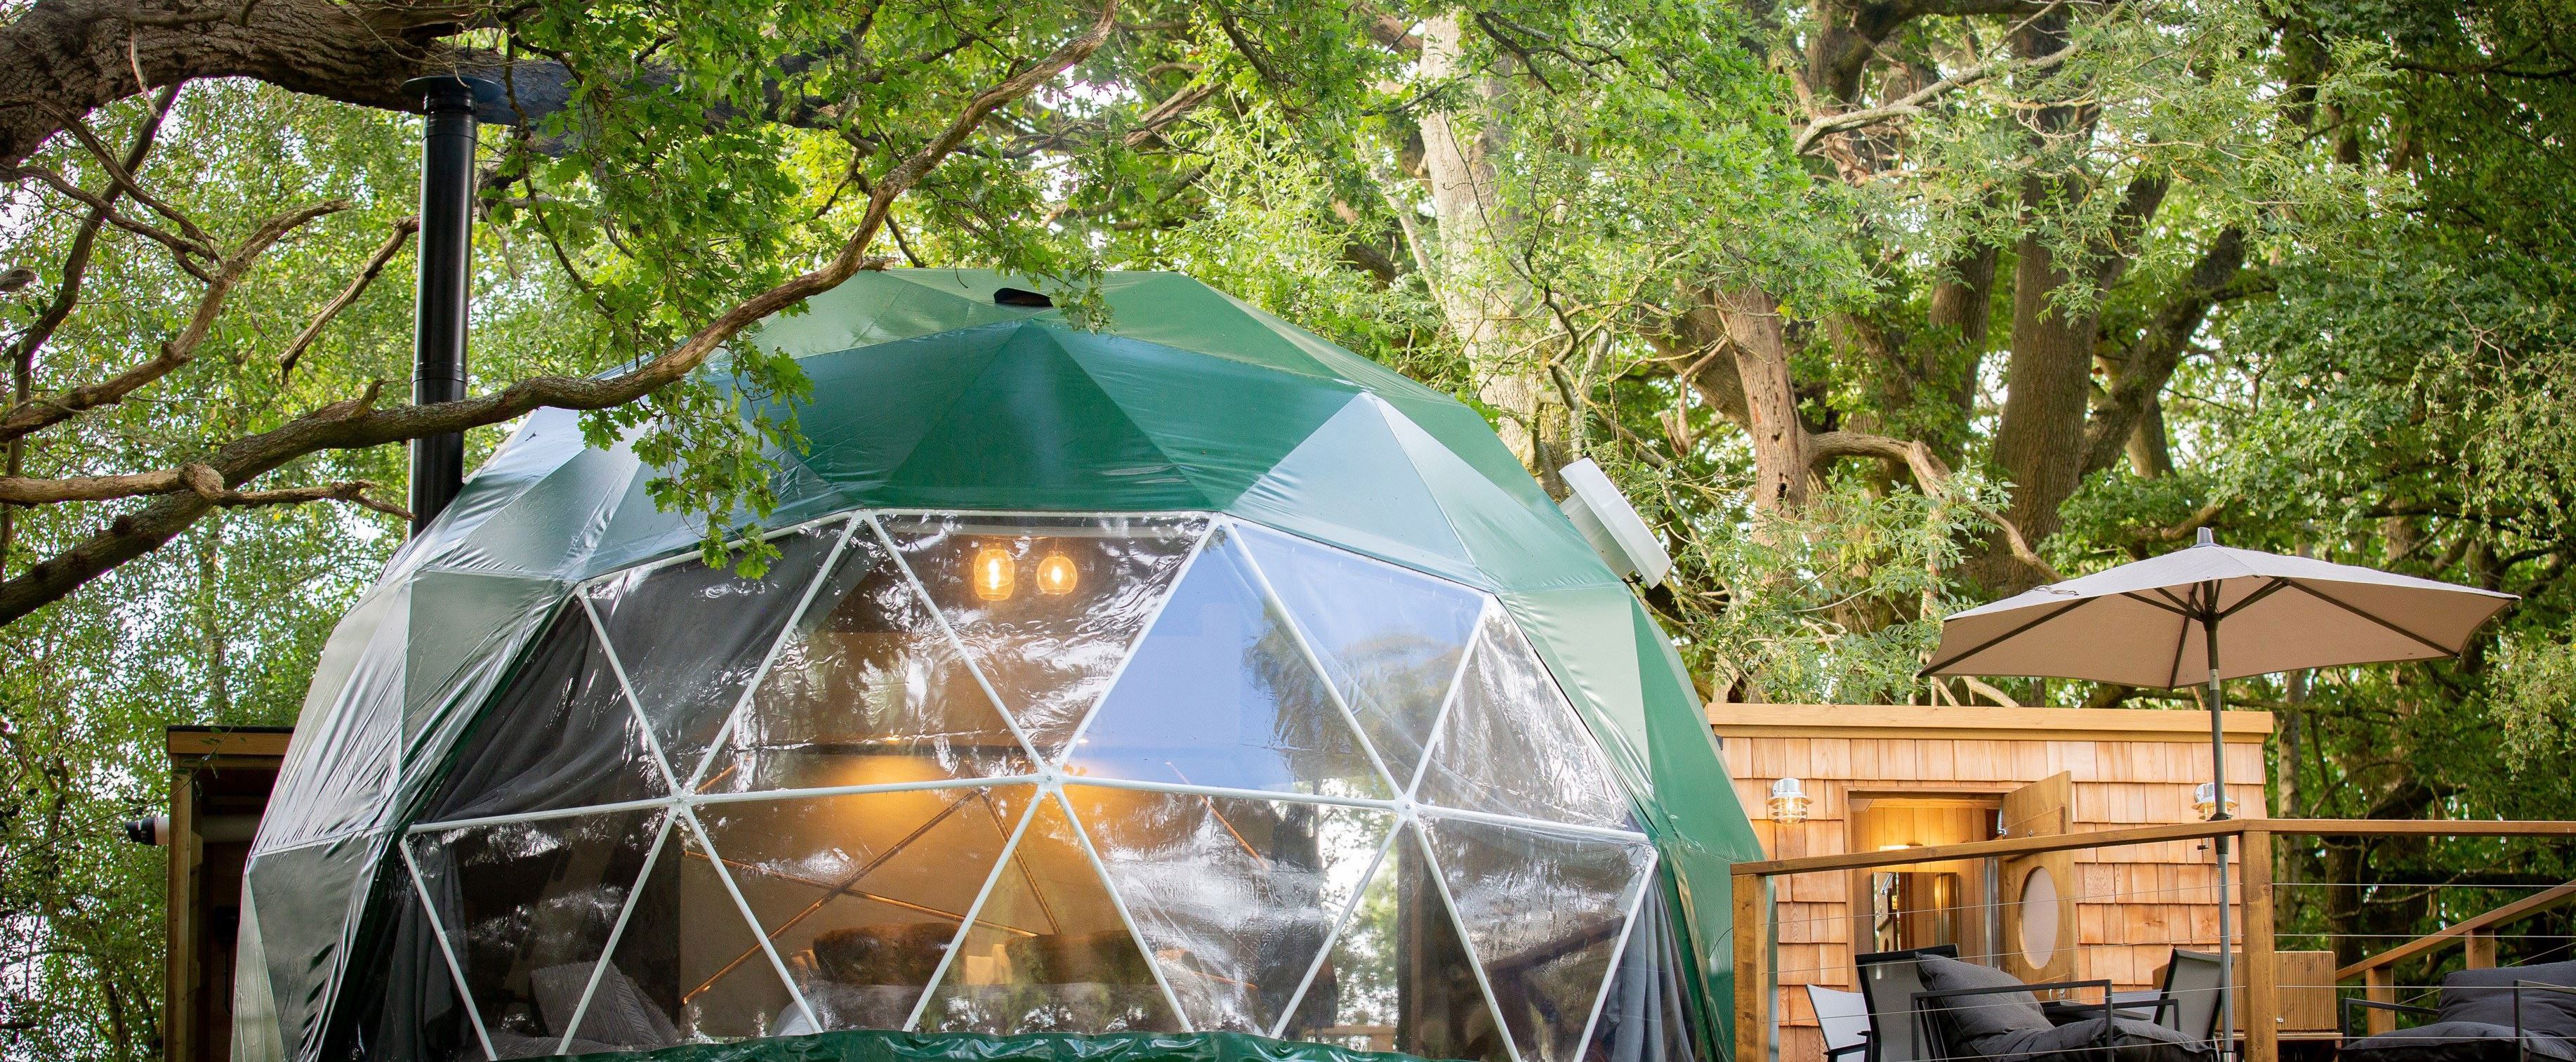 Glamping Glass Geodesic Dome House